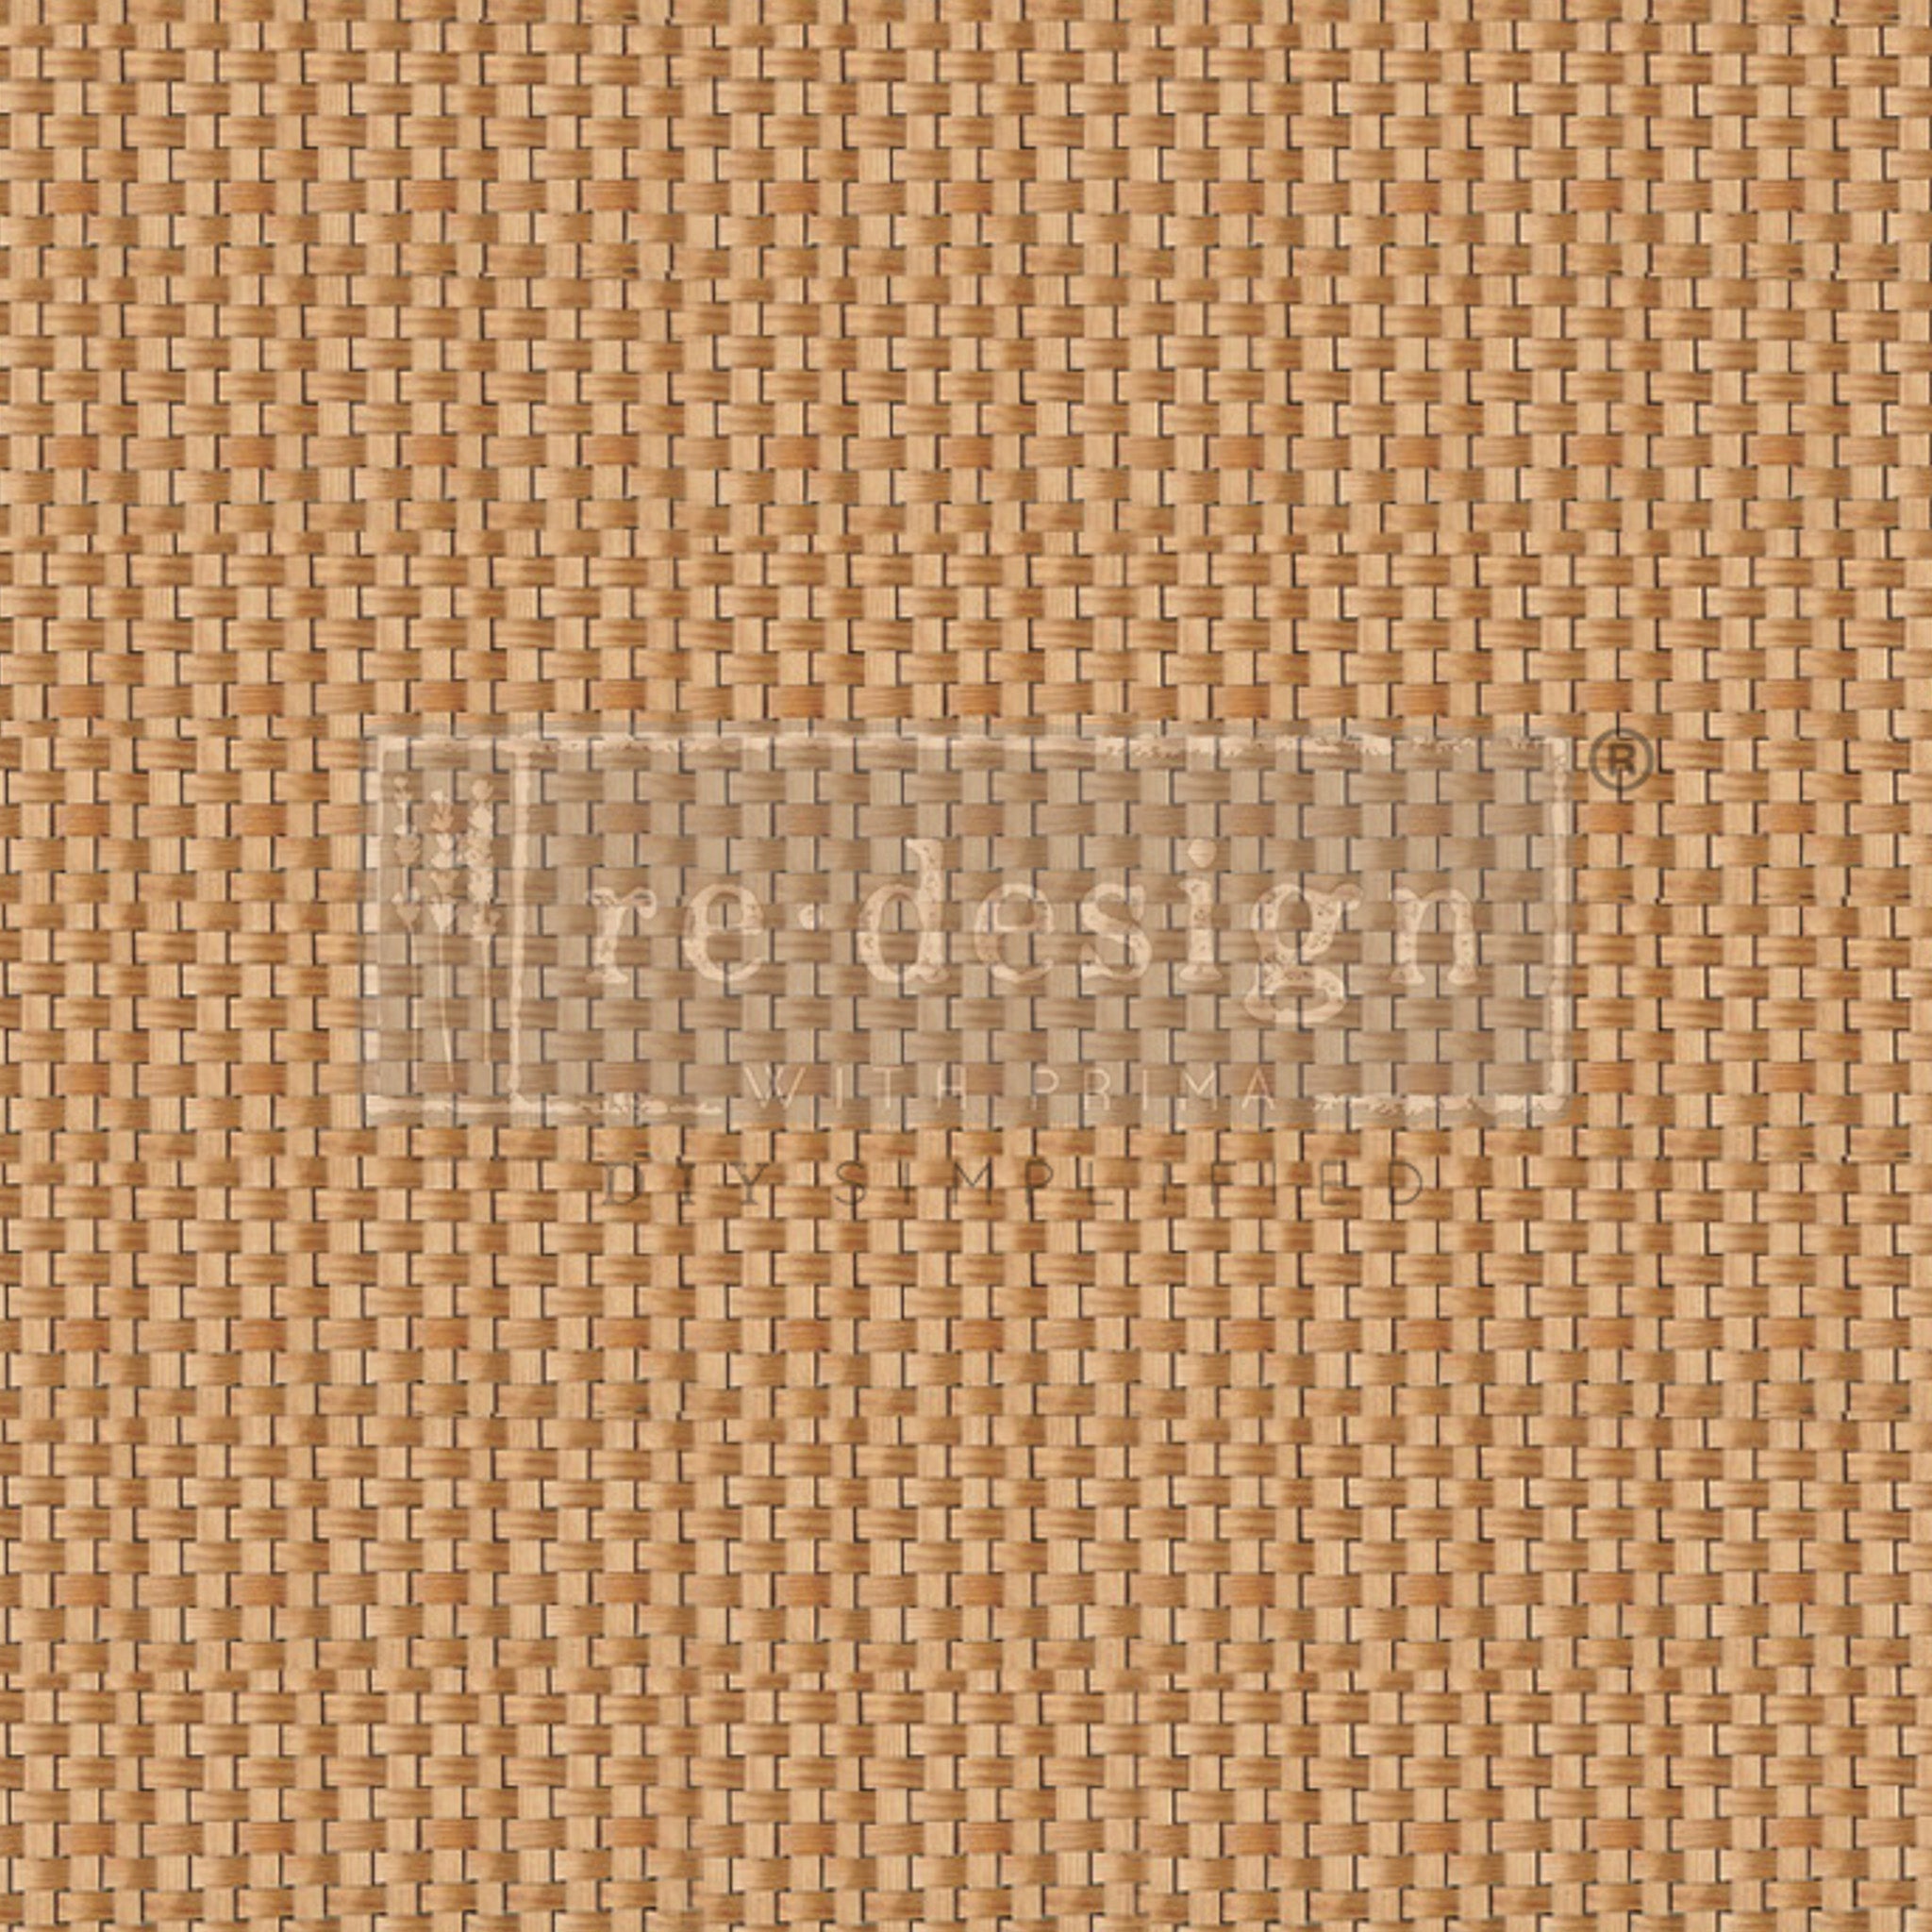 A1 fiber paper design that features a repeating square basket weave pattern in a neutral palette. 